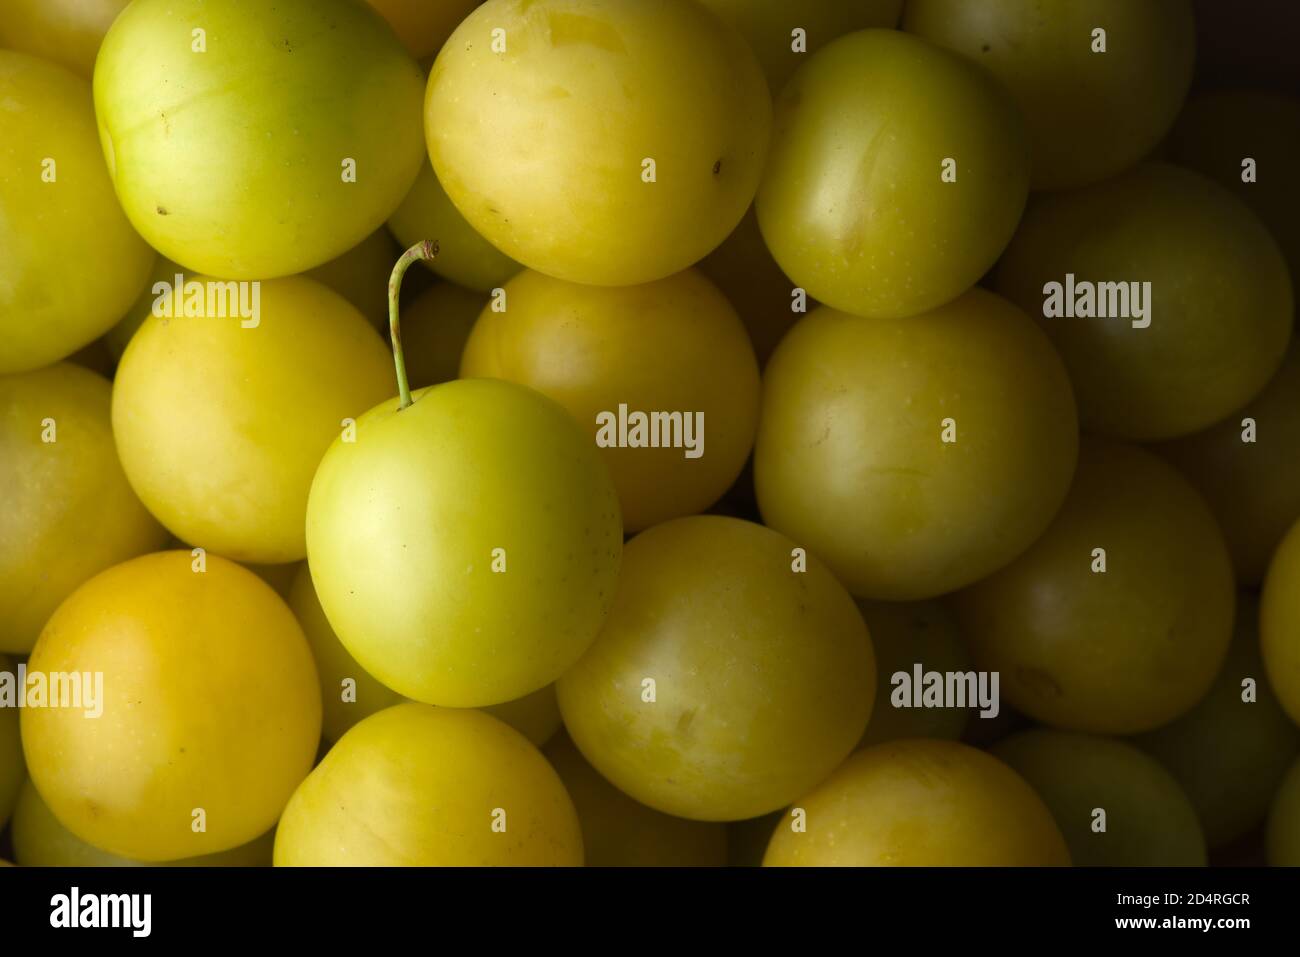 8 - Medium shot of many yellow mirabelle plums, ready to eat. One has a stalk left in. Vibrant color and directional lighting creates texture. Stock Photo